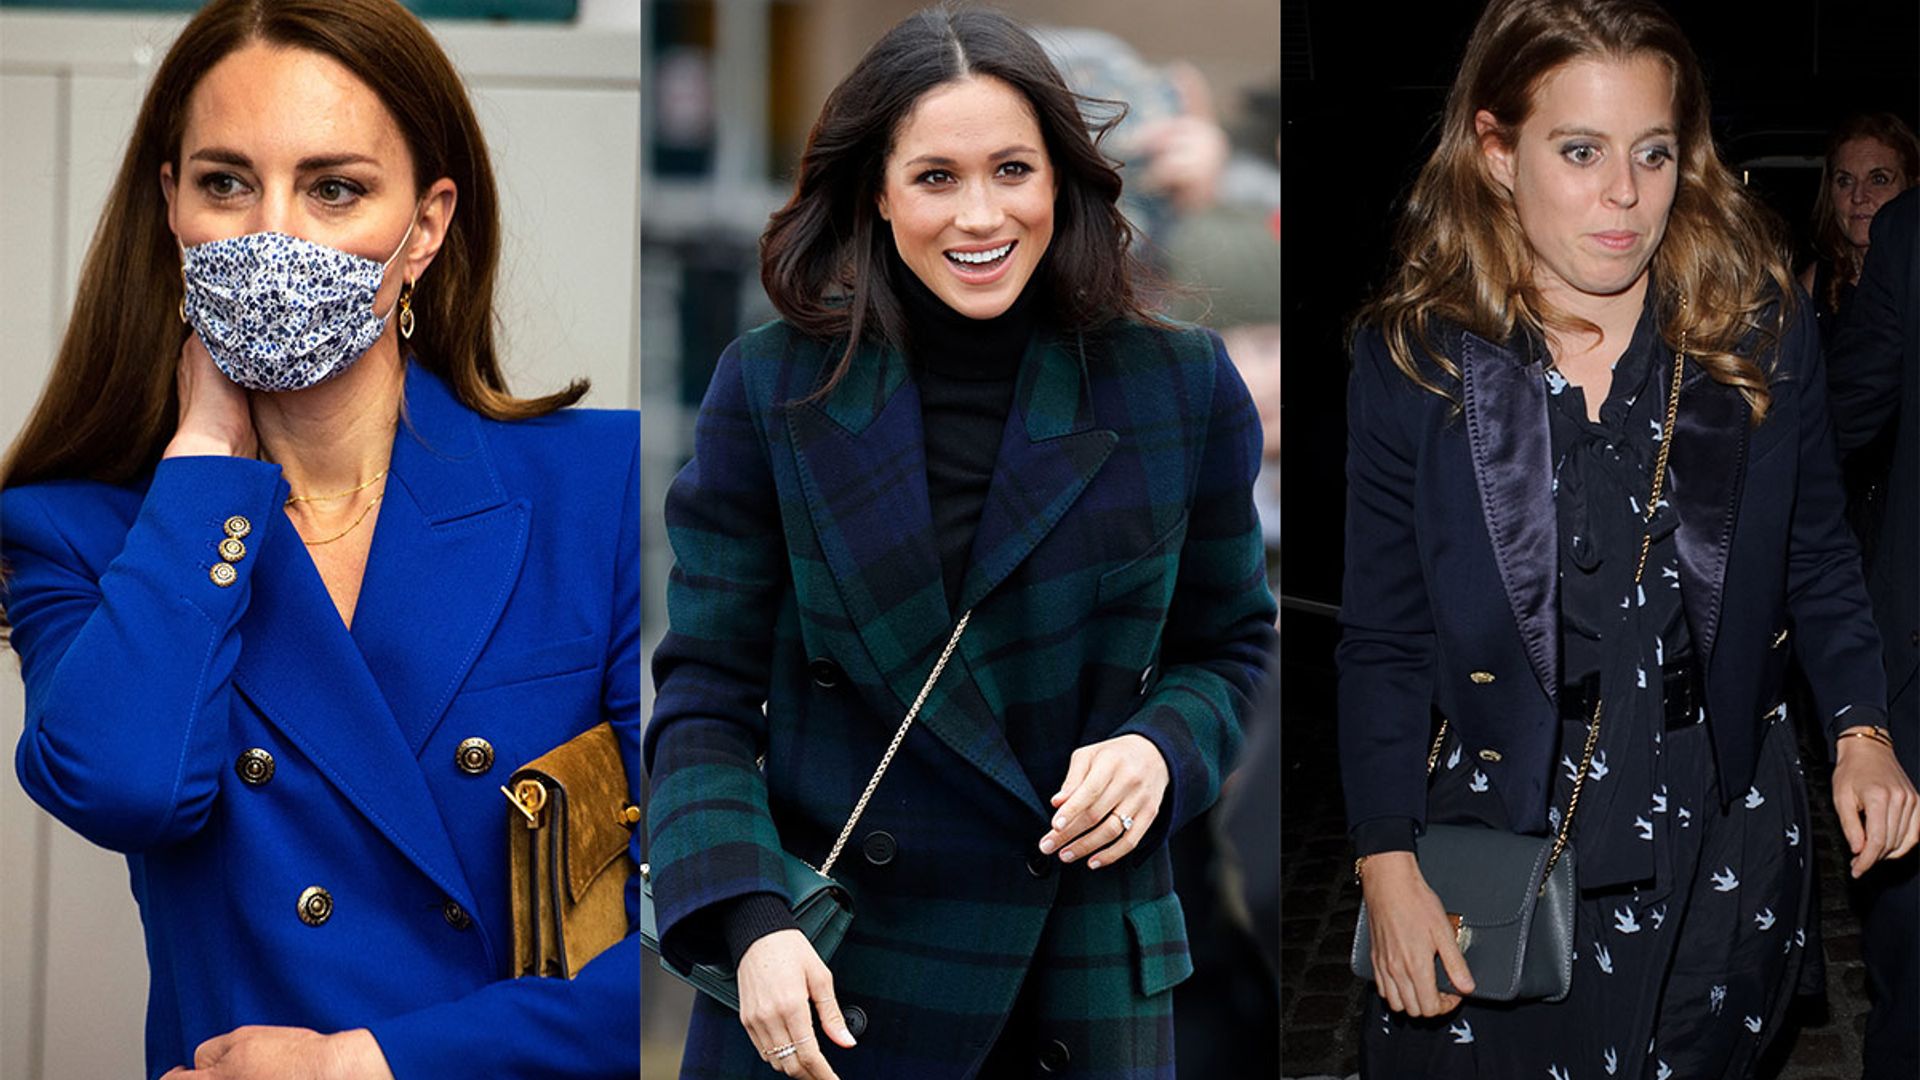 The Most Wanted Bag, According To A-List And Royals - A&E Magazine